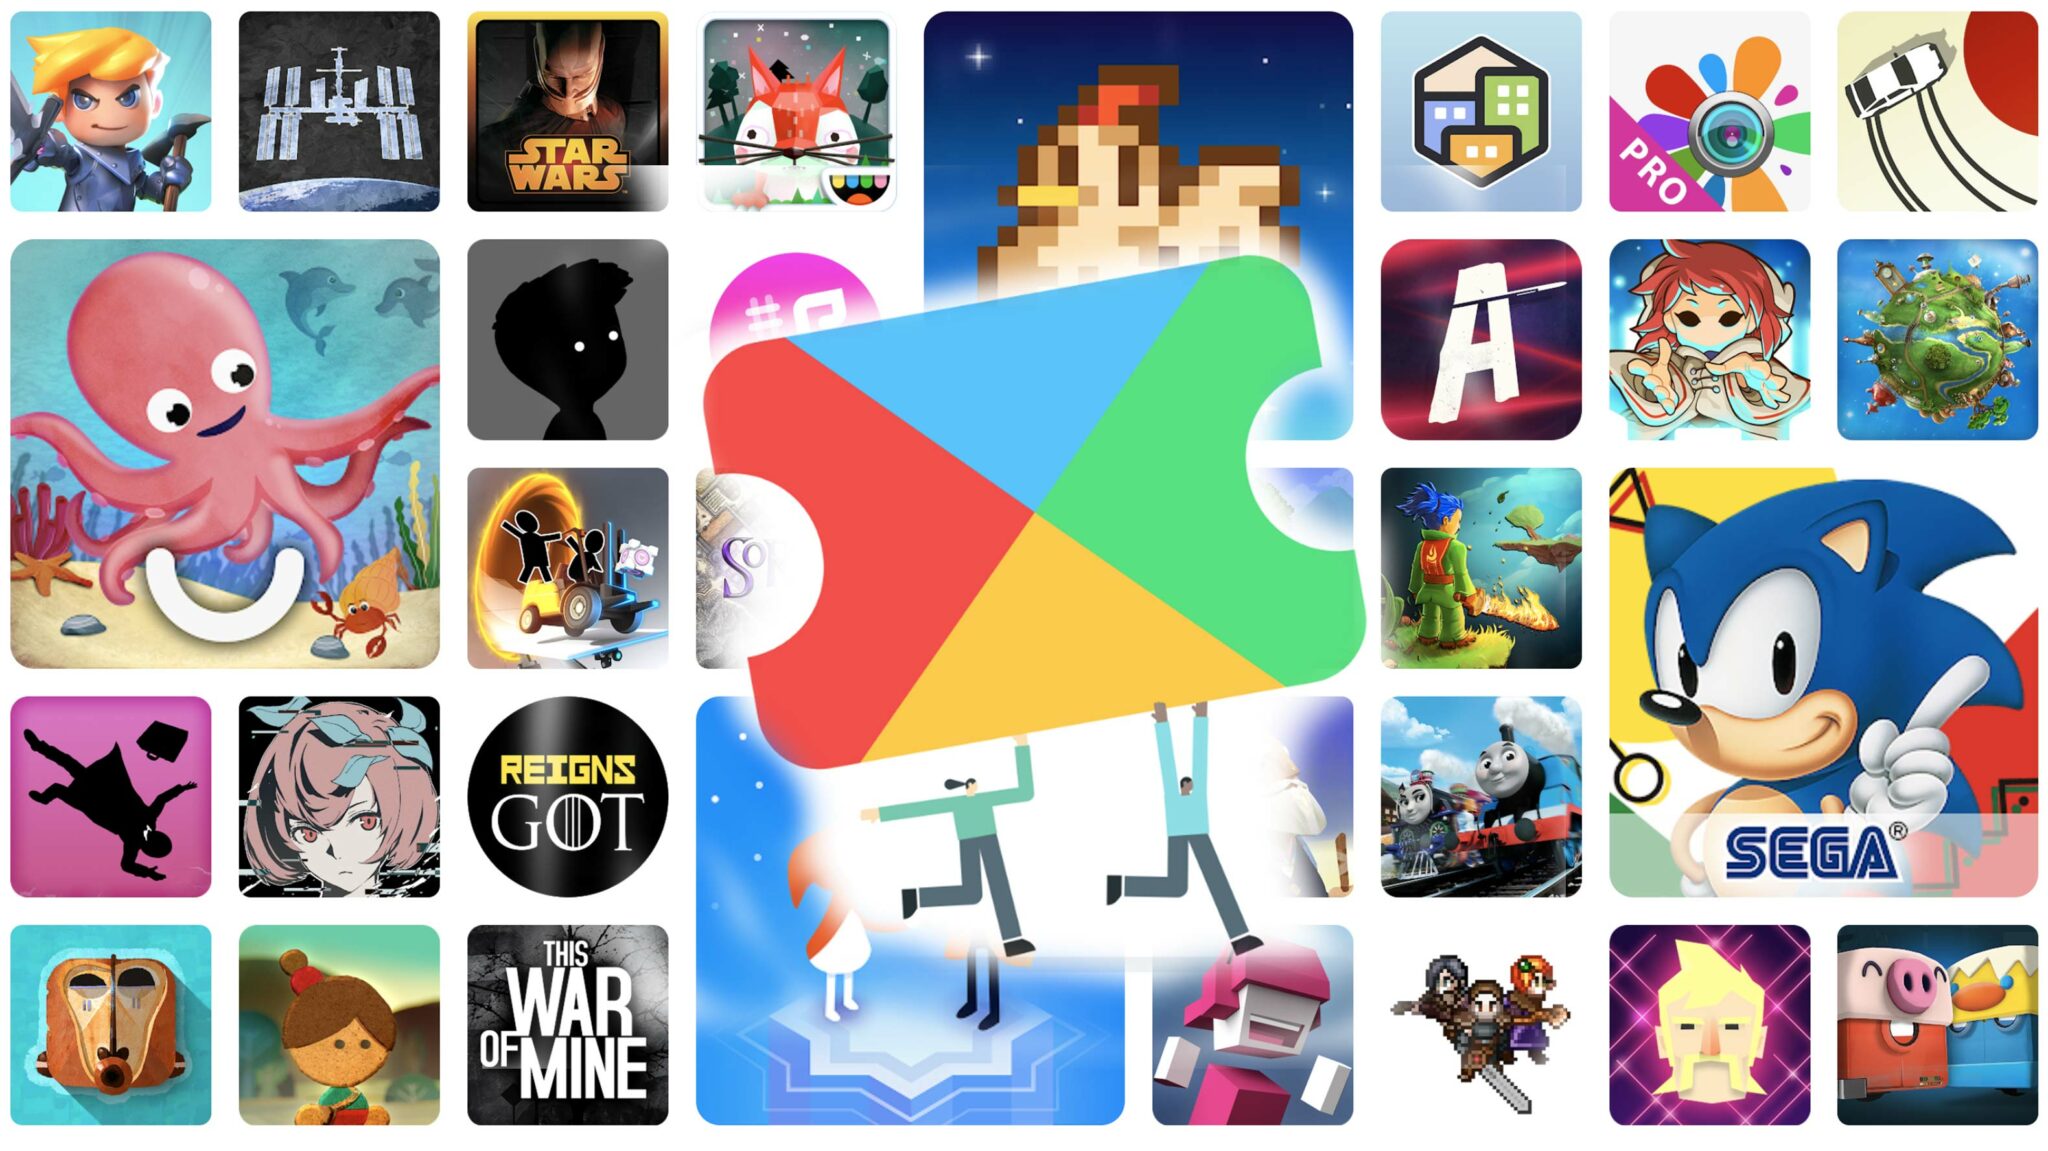 Remember Google Play Pass? It Just Added $40 Worth Of Free Games